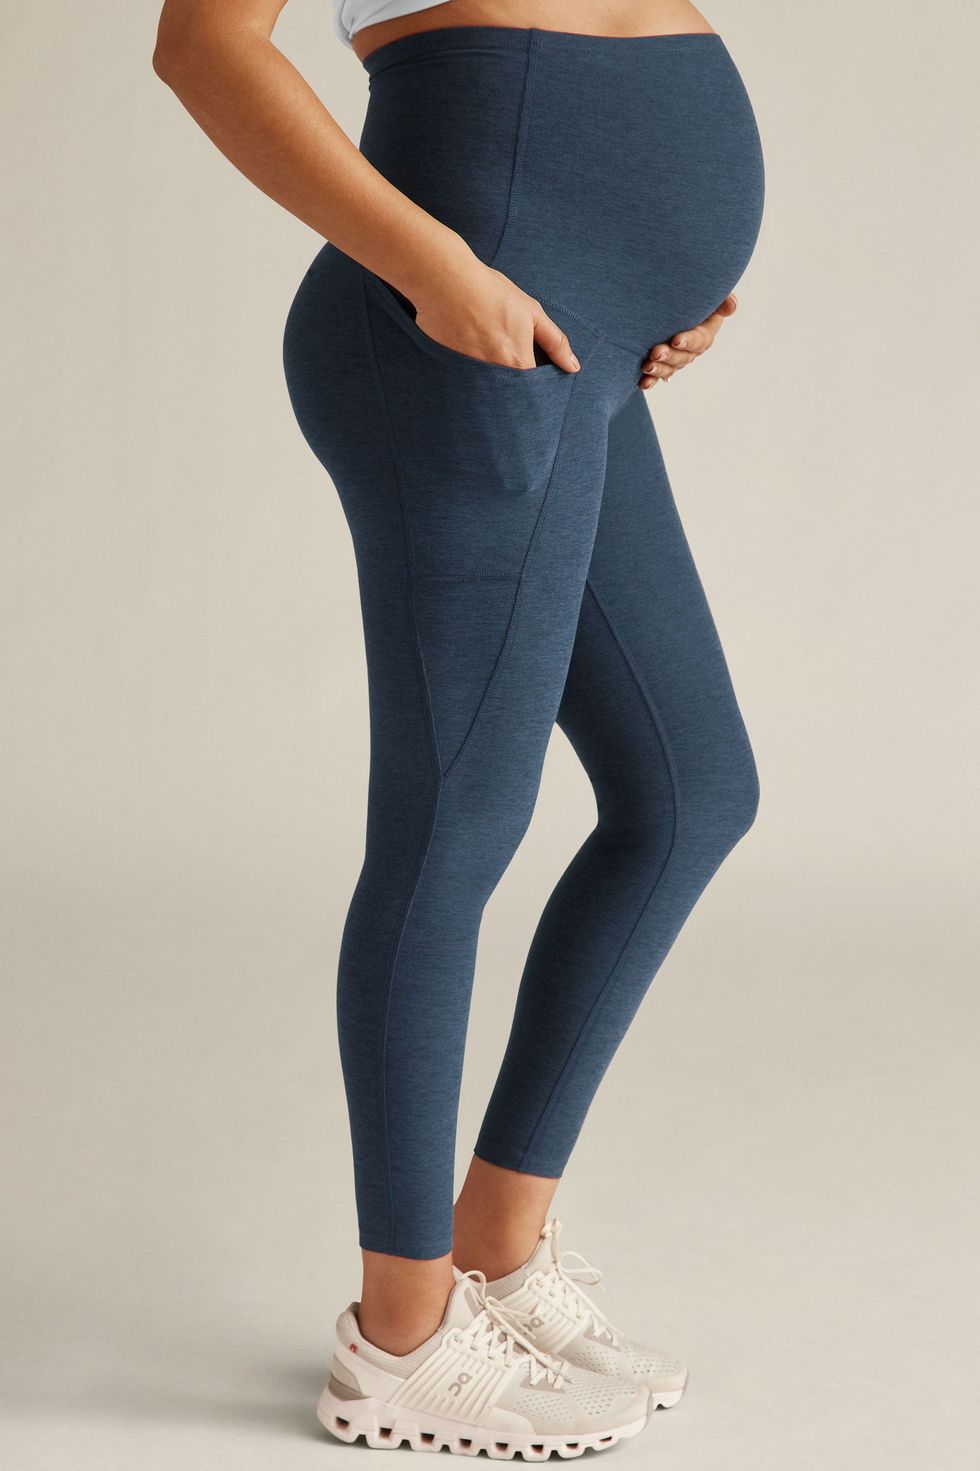 Comfortable pregnancy sports leggings. Does not press the belly